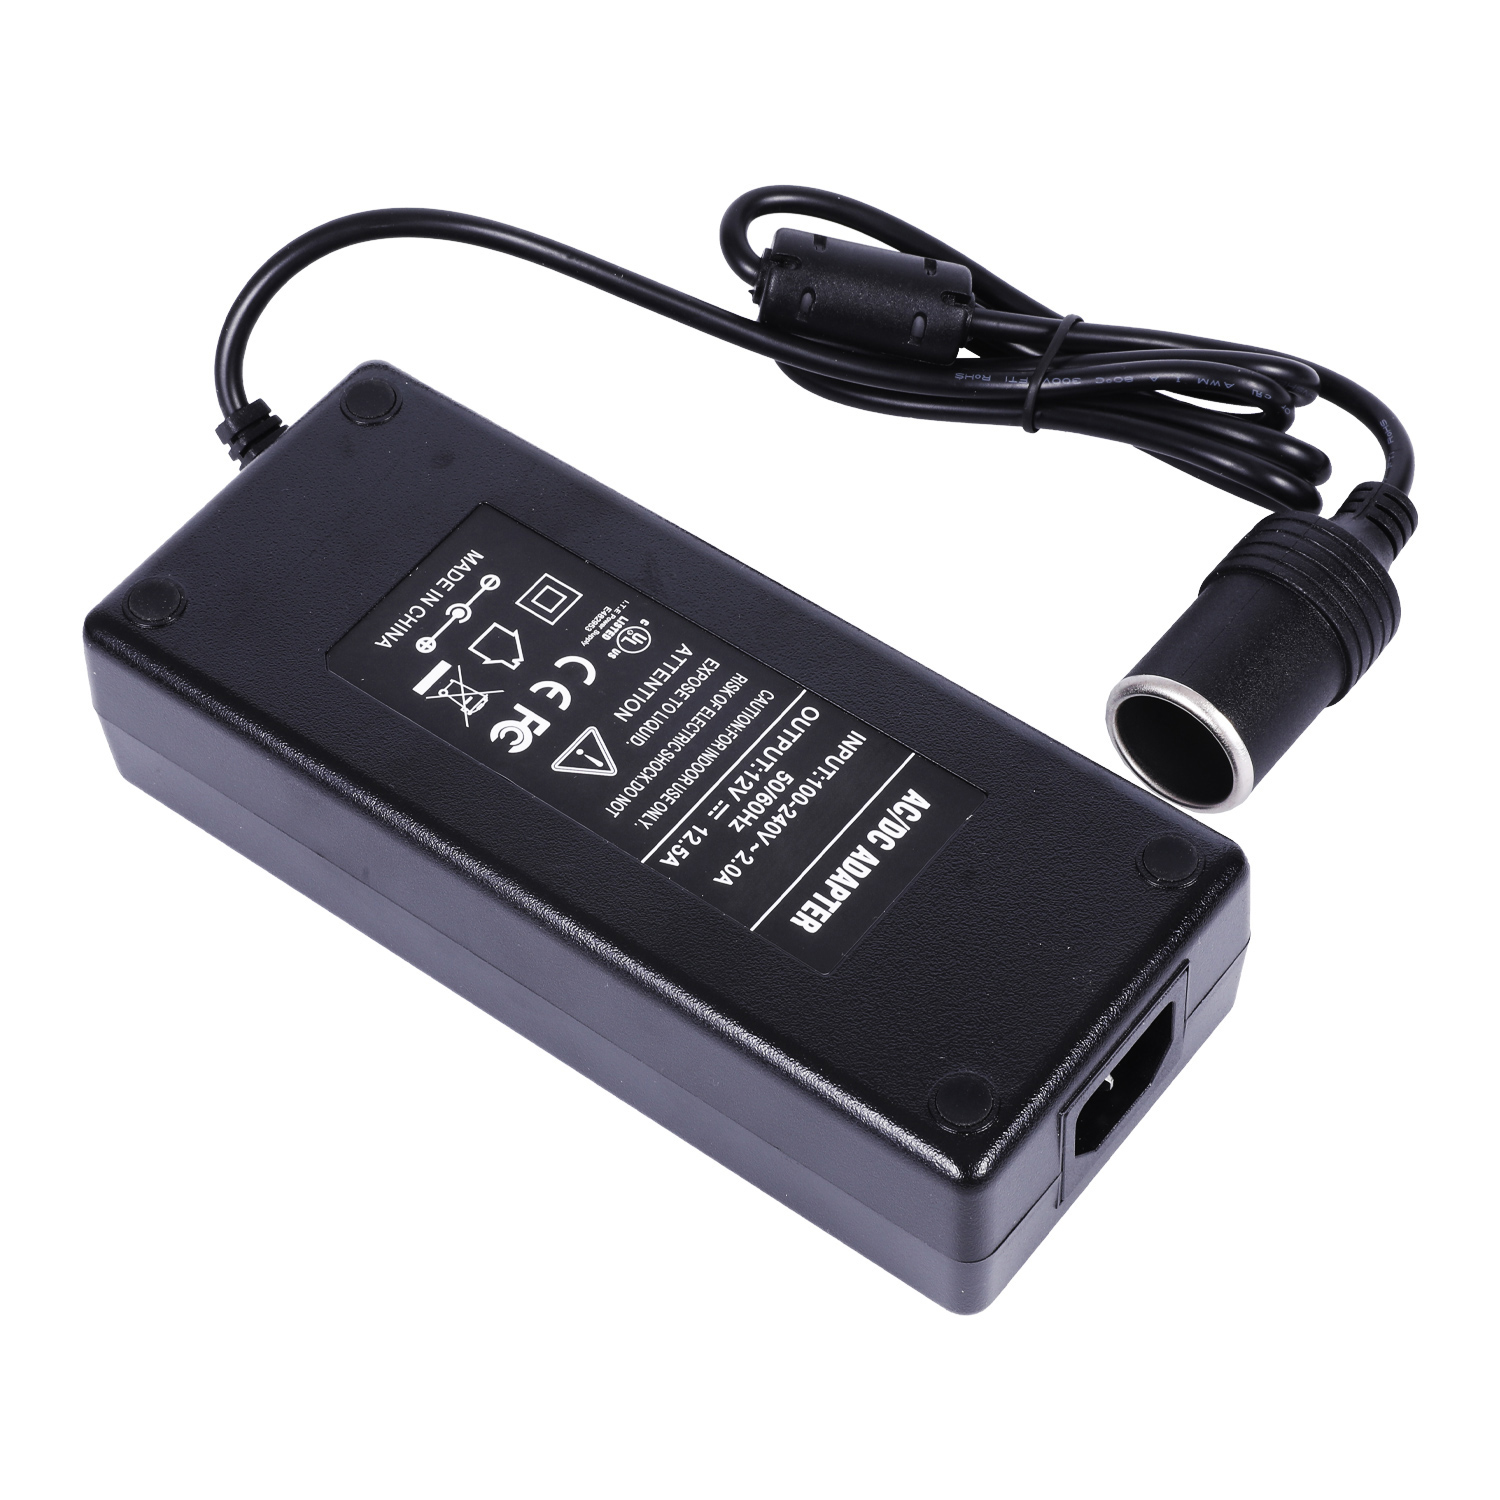 150 W adapter ce (1)ag1